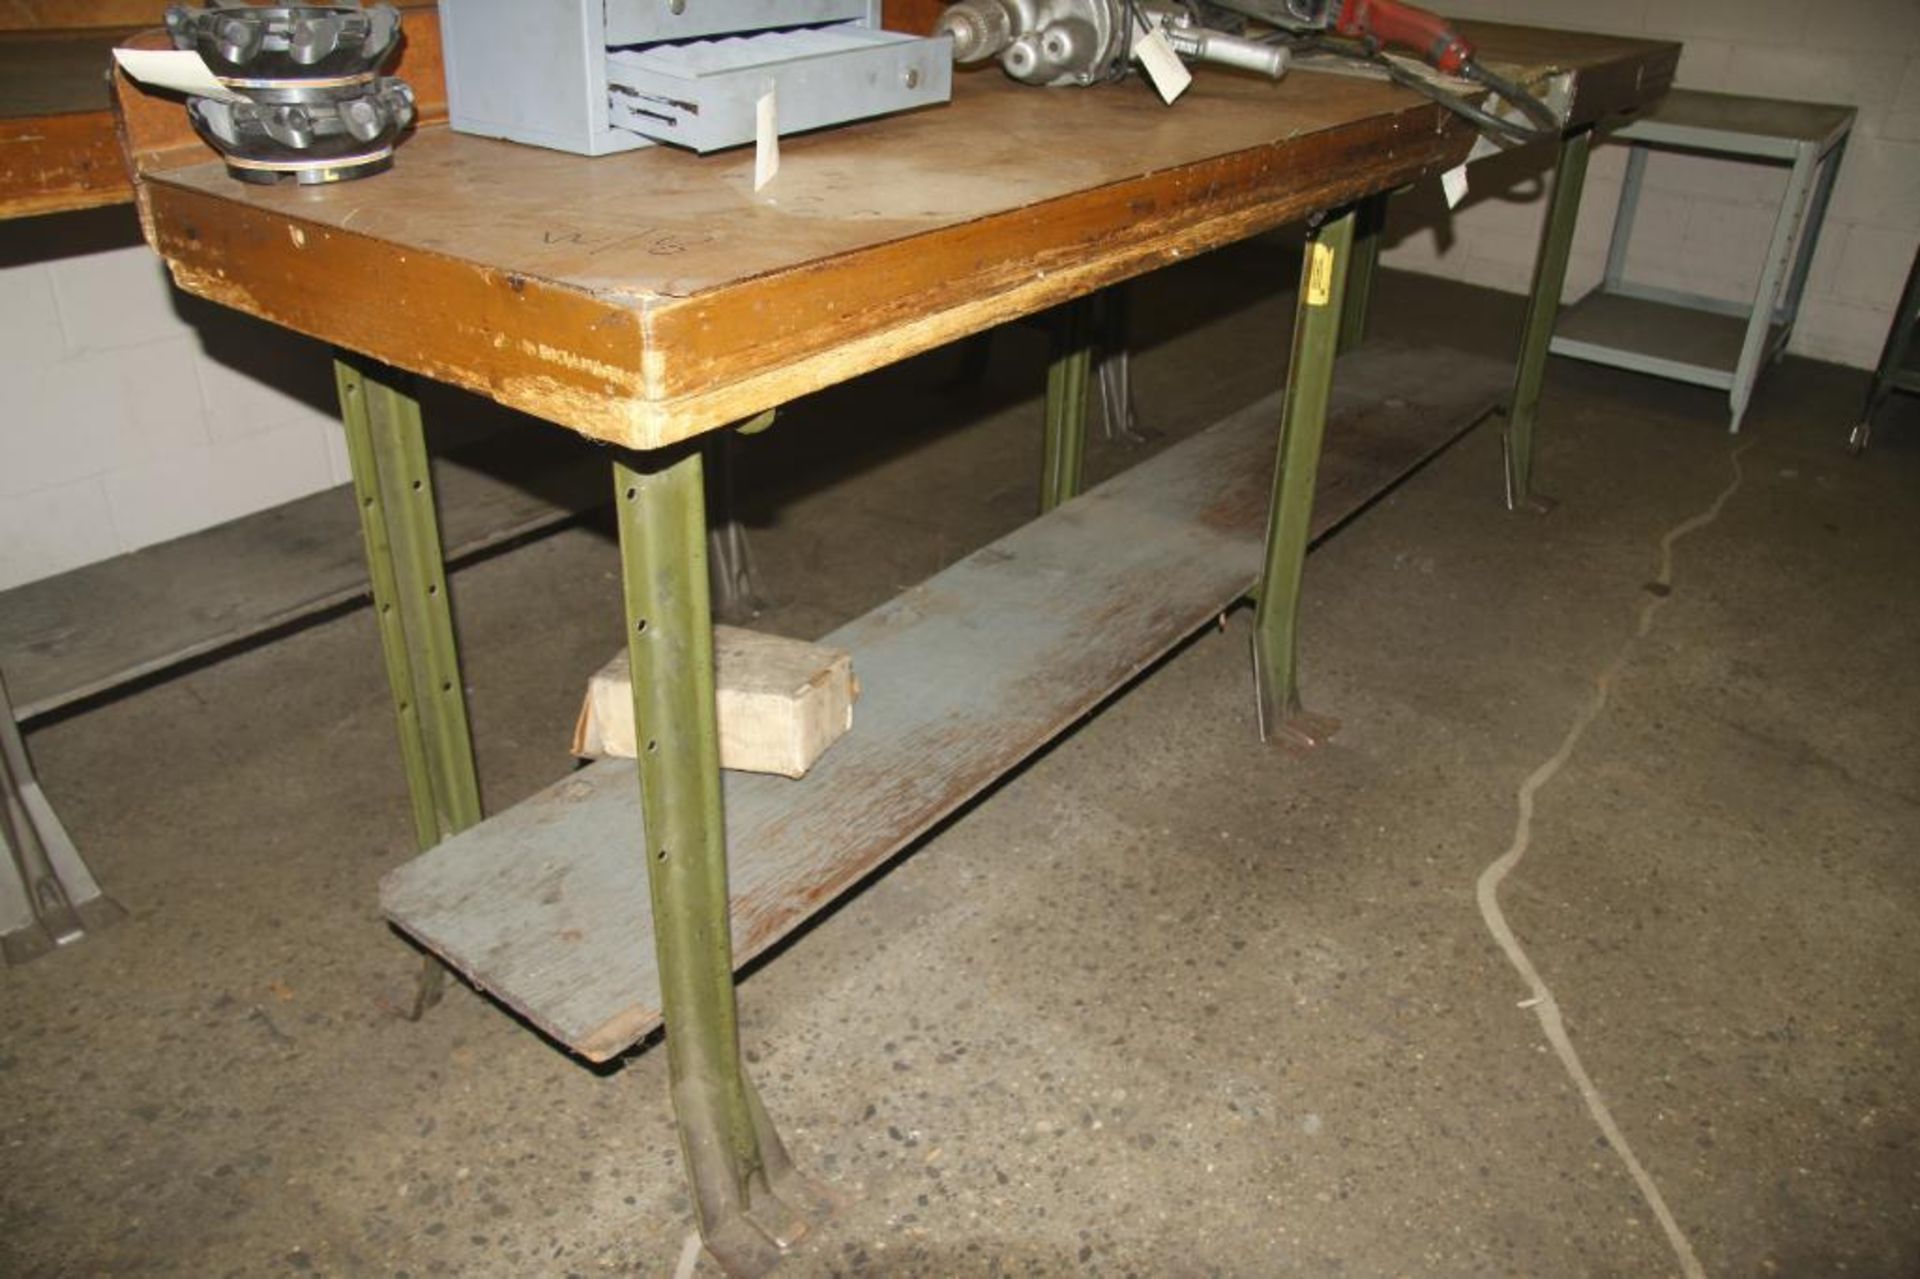 (3) 2' X 8' Woodtop Work Benches With Steel Legs ( No Contents) - Image 3 of 3